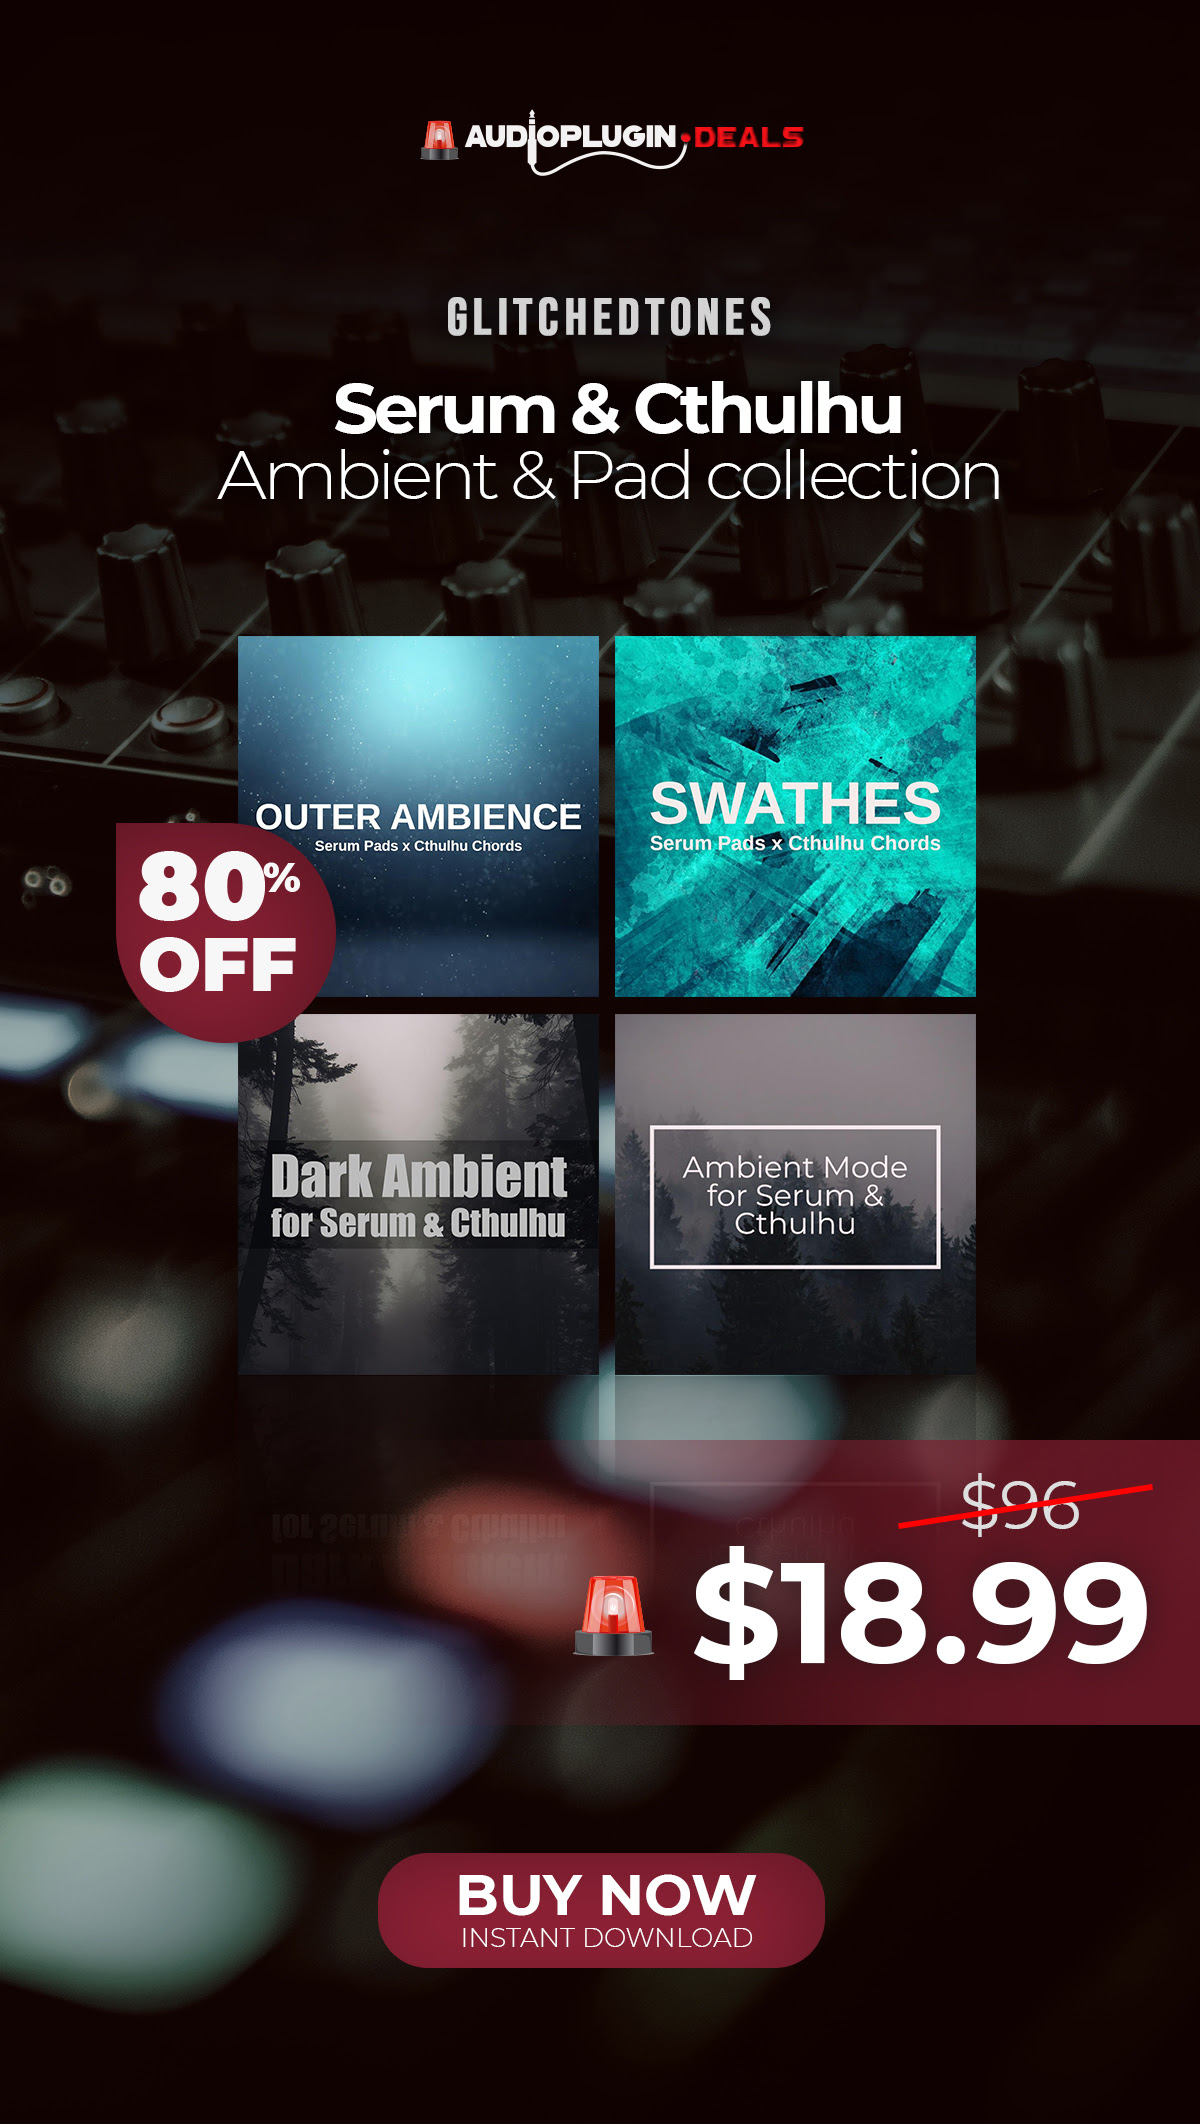 80% Off on Serum & Cthulhu Ambient & Pad Collection by Glitchedtones